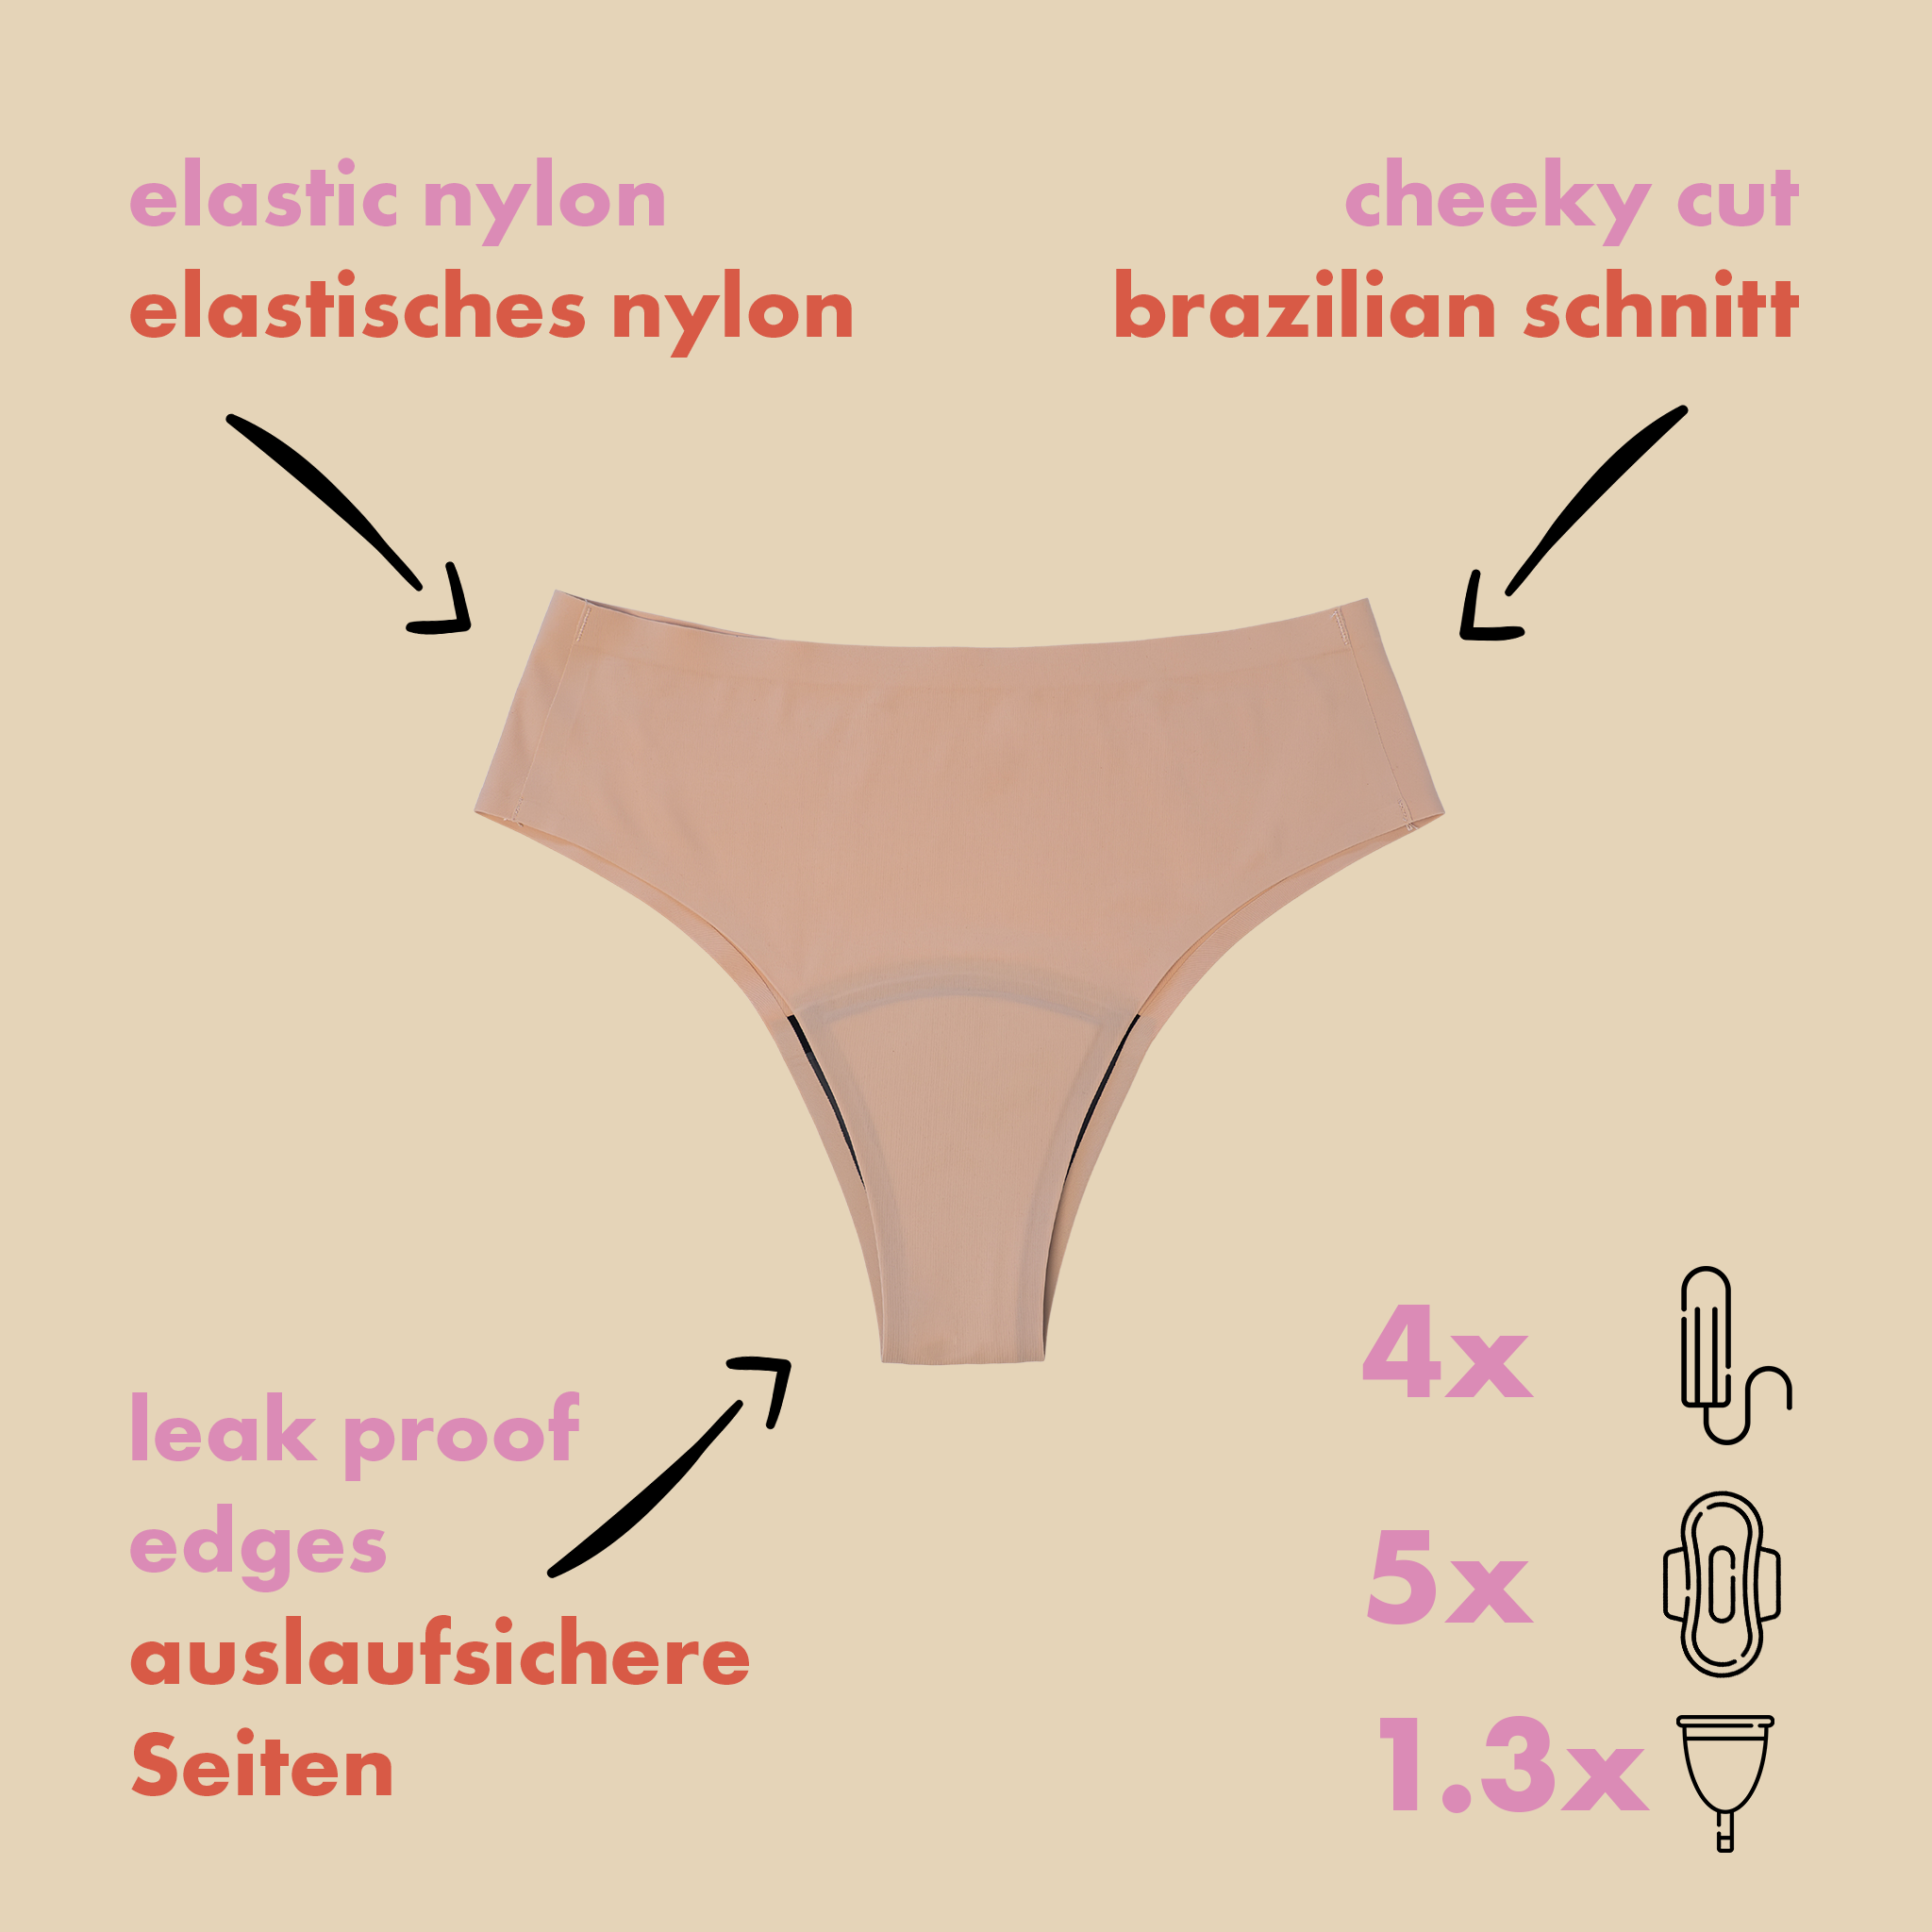 dais period underwear in cheeky cut with beige colour shown with the benefits of elastic nylon, cheeky cut, leak proof edges and super absorbency of up to 4 tampons of blood. 